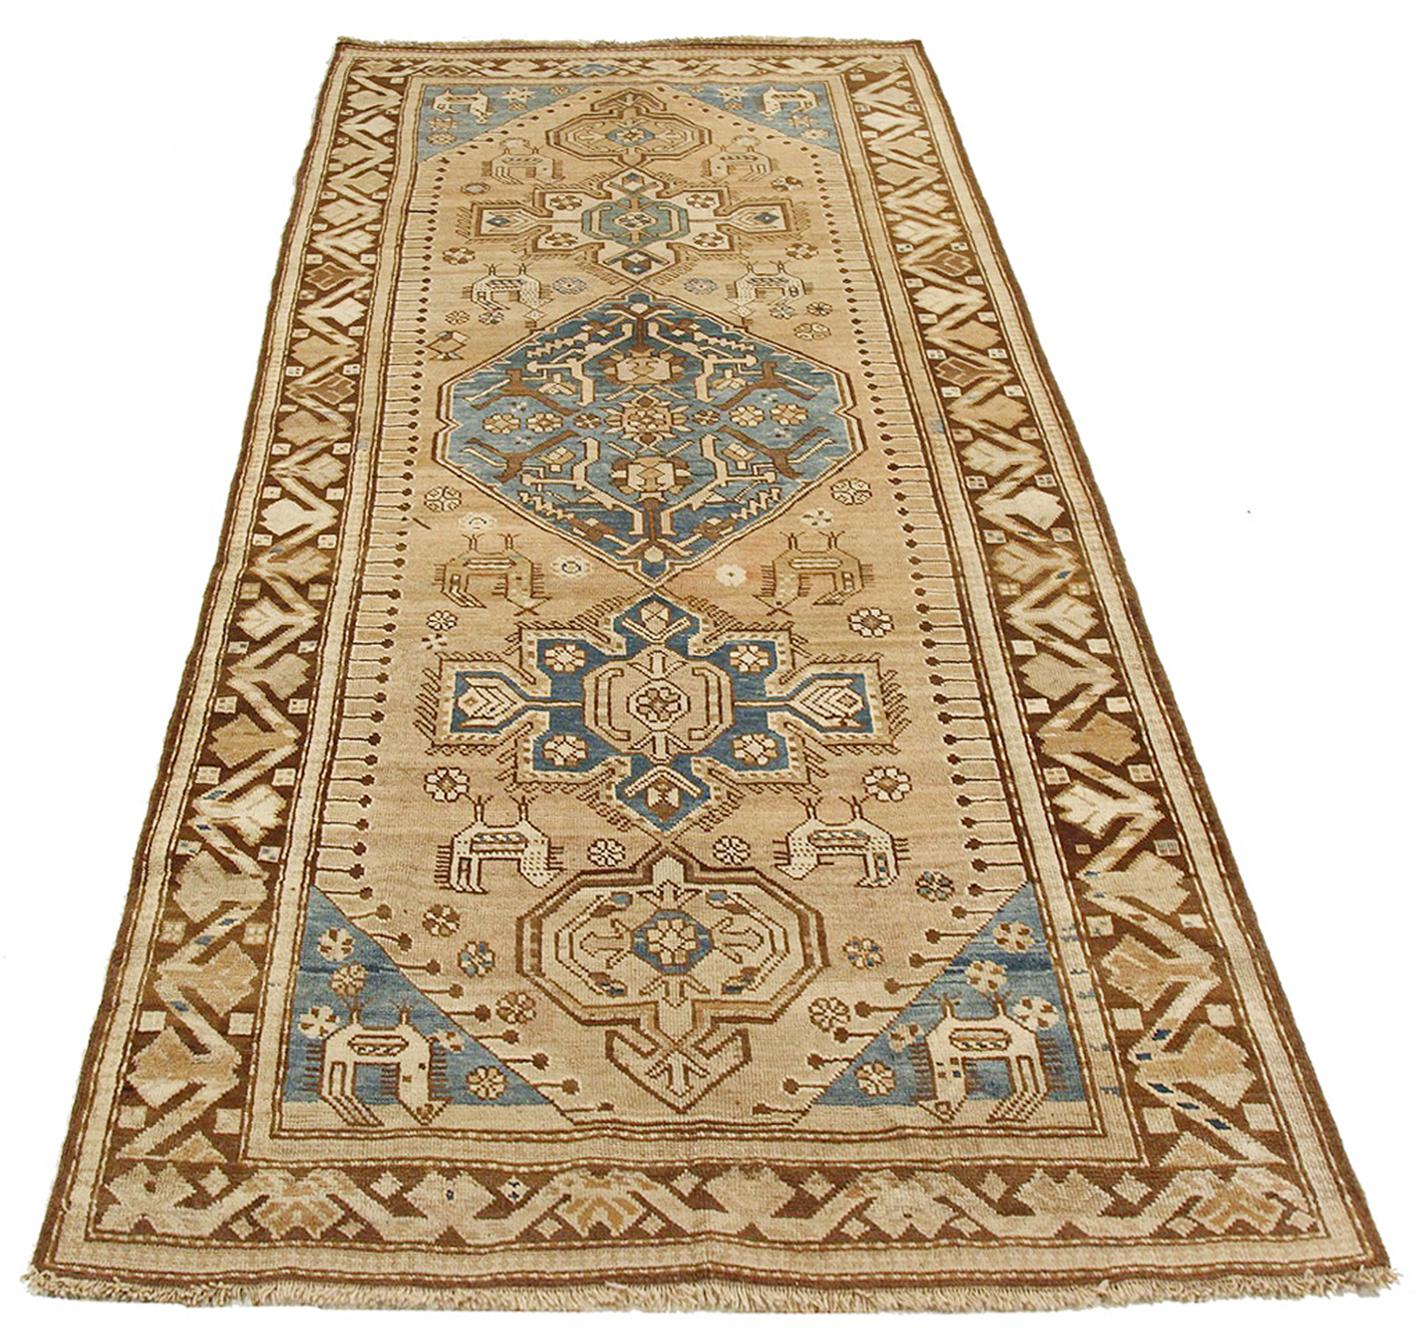 Antique Russian rug handwoven from the finest sheep’s wool and colored with all-natural vegetable dyes that are safe for humans and pets. It’s a traditional Kazak design featuring floral medallion details in brown and blue over a beige field. It’s a